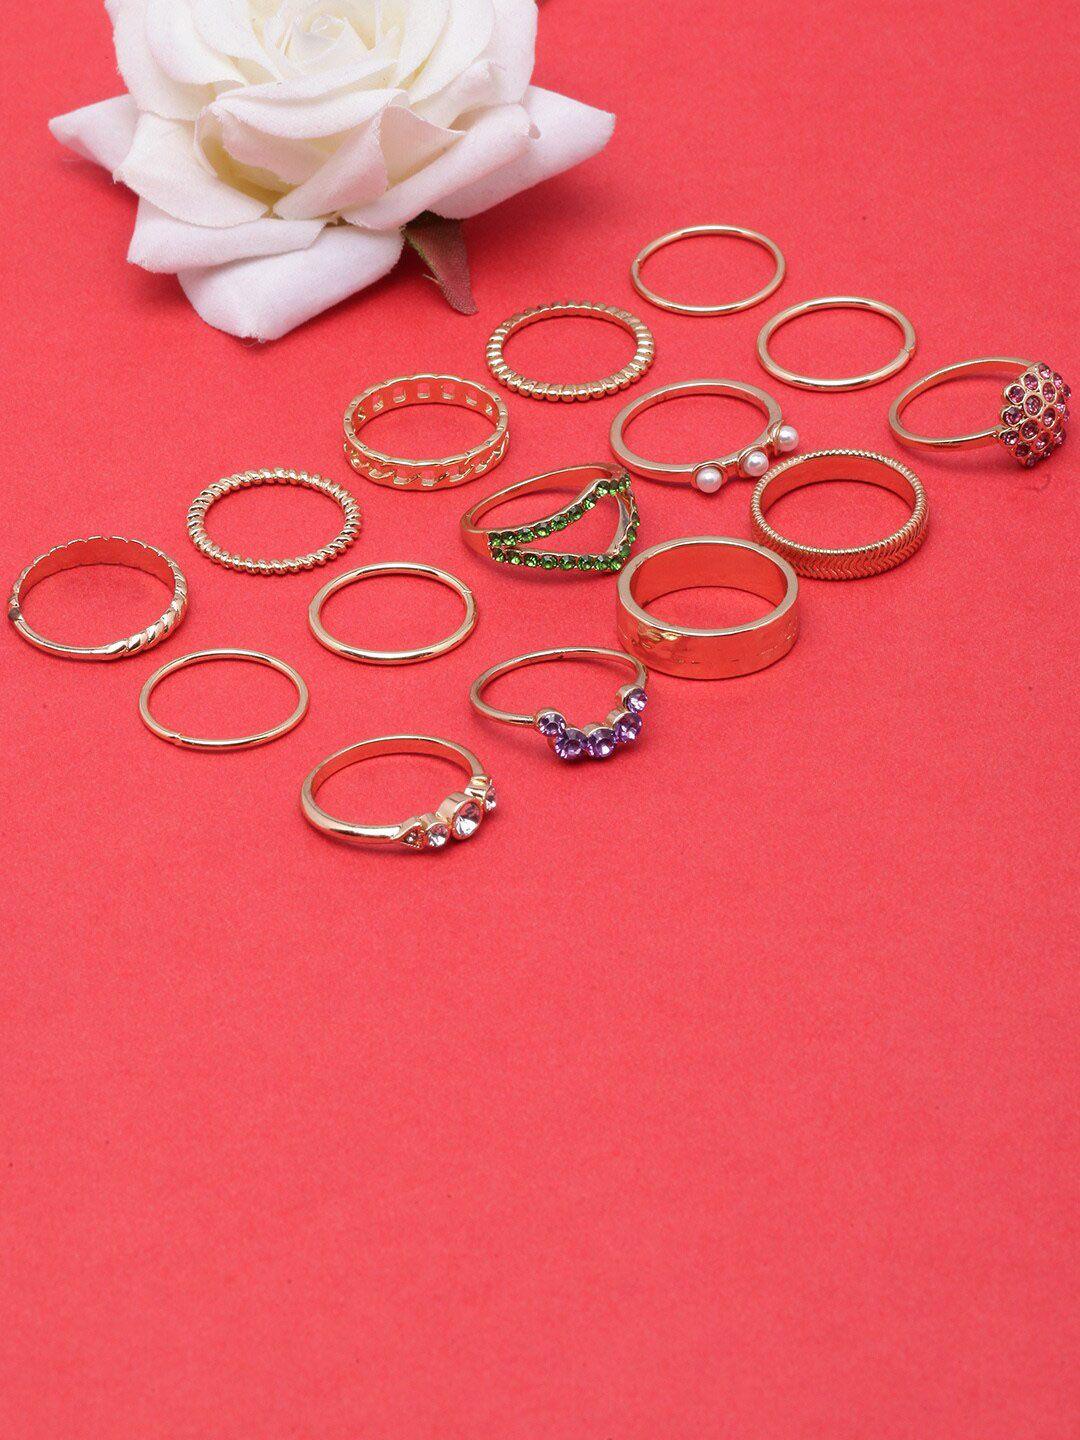 dressberry set of 15 gold-plated cz-studded finger rings